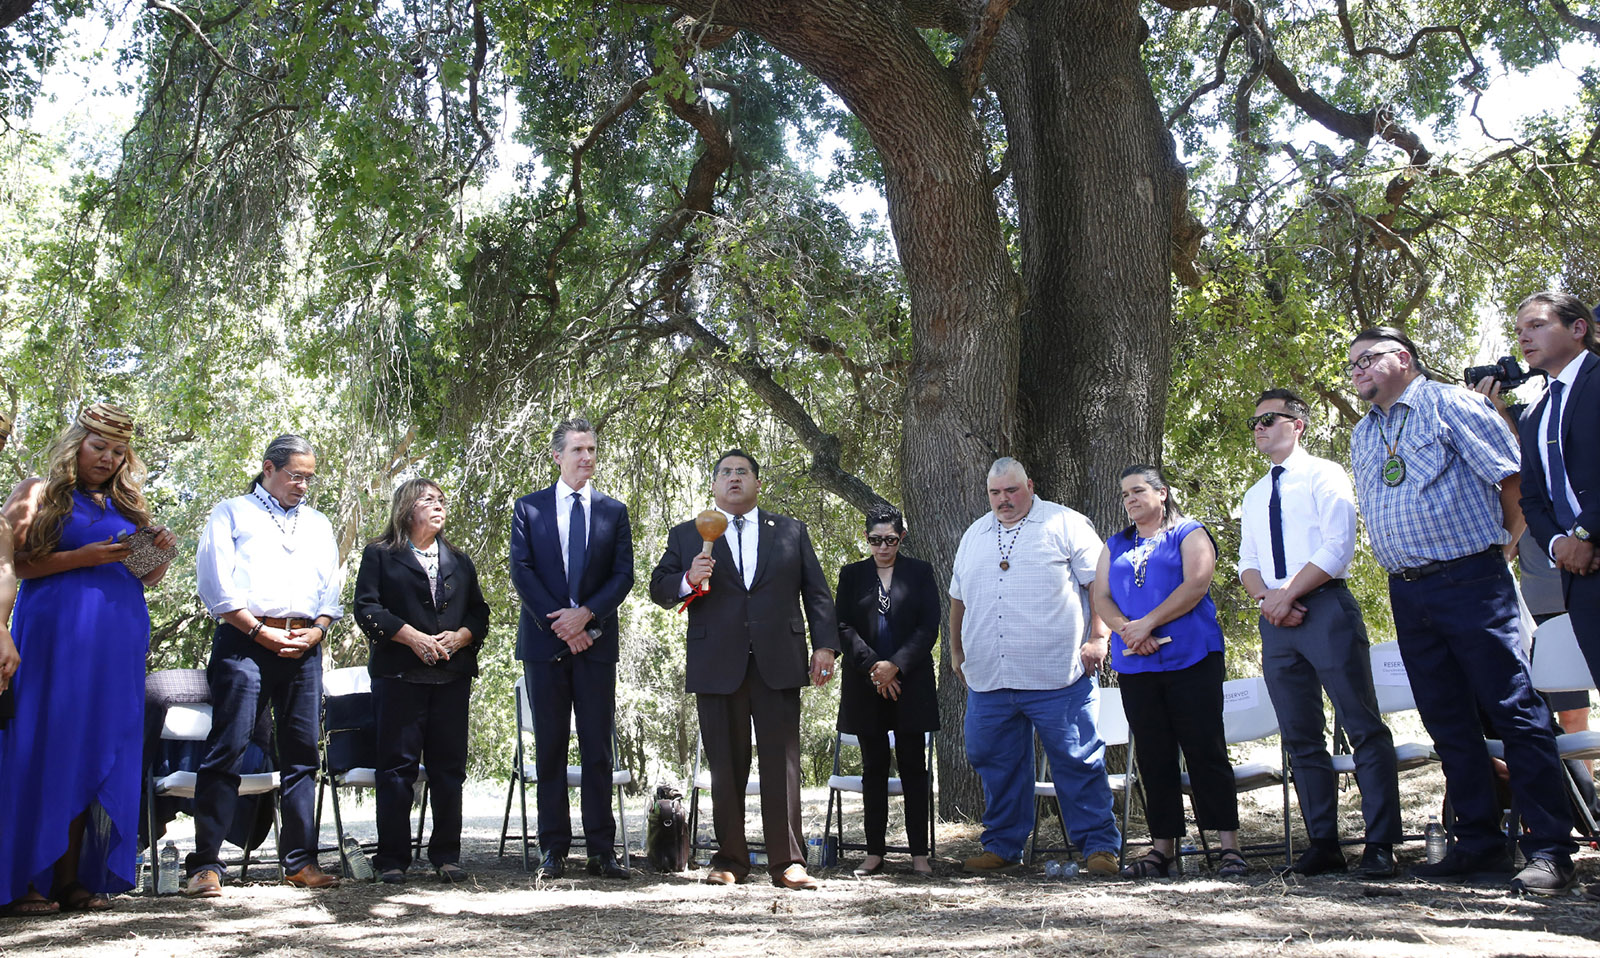 California assemblyman and member of the Serrano/Cahuilla tribe James Ramos, Governor Gavin Newsom, and tribal leaders from around the state opening a meeting at the future site of the California Indian Heritage Center, West Sacramento